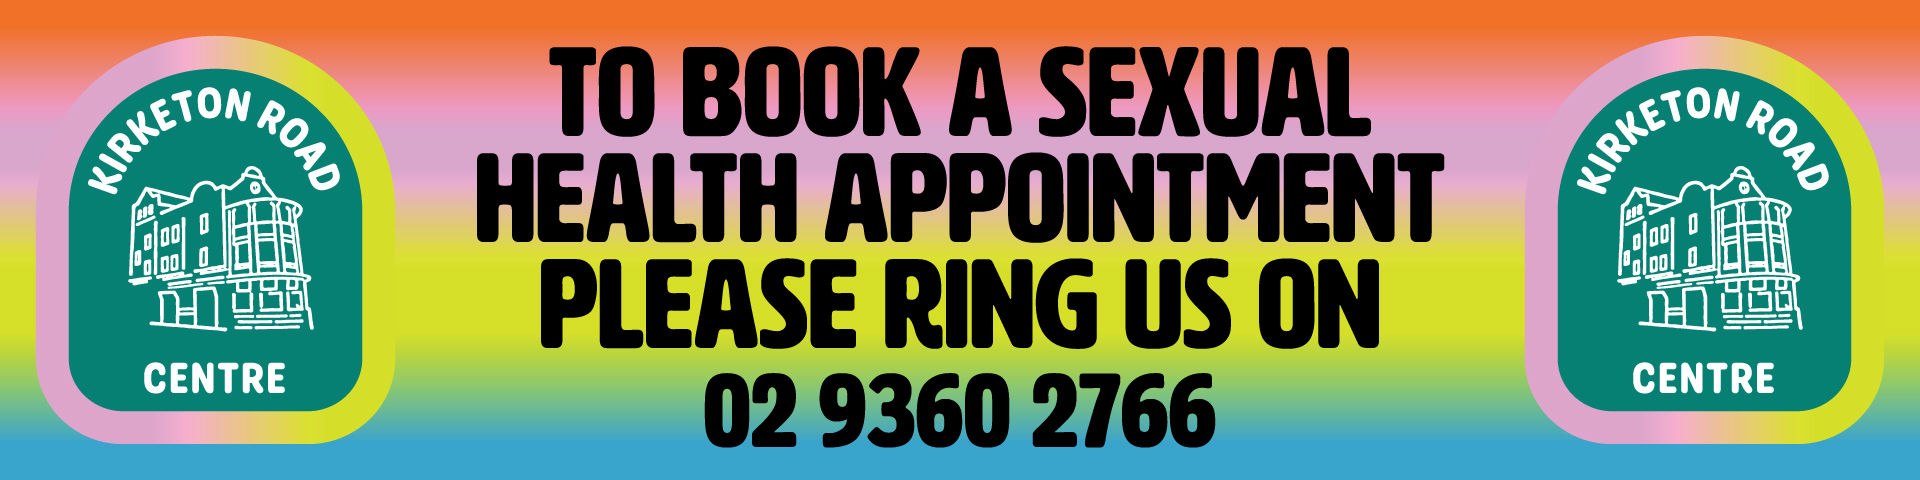 KRC LOGO + To book a sexual health appointment please ring us on 02 9360 2766